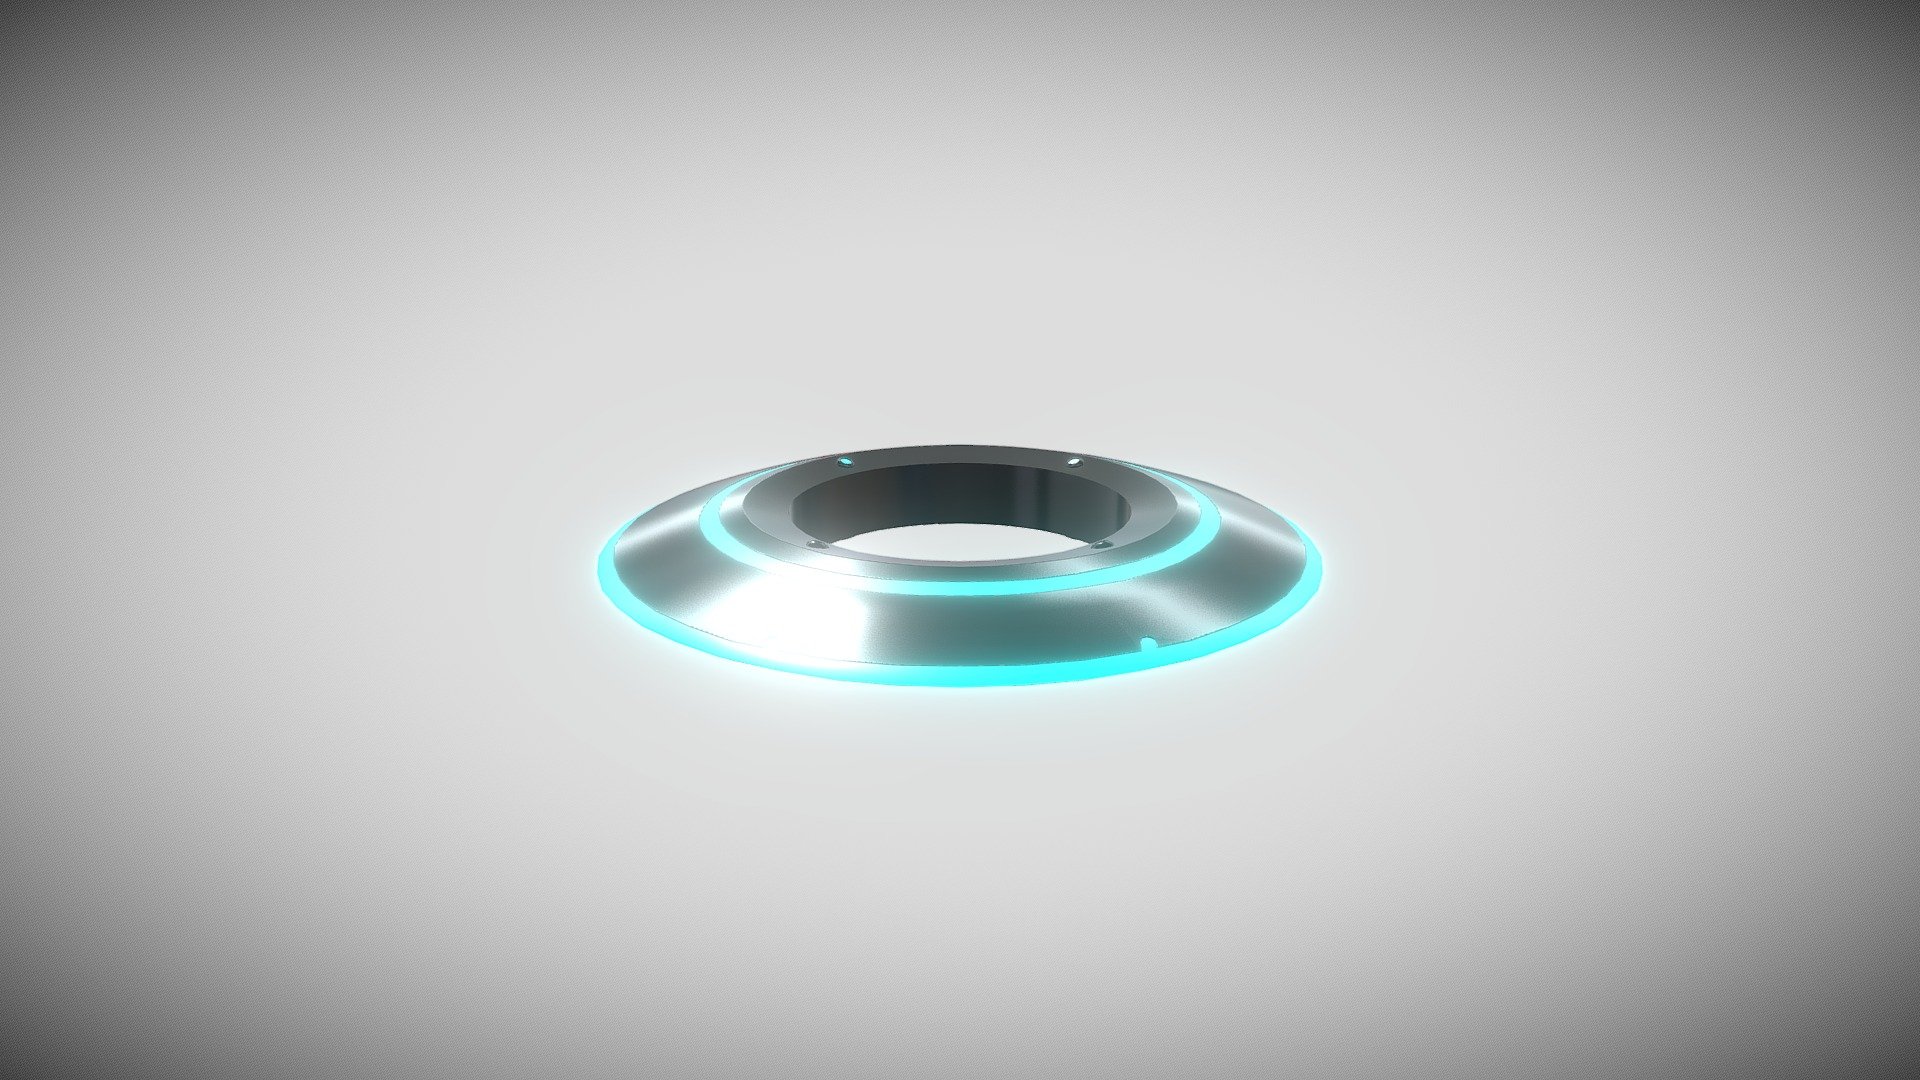 The Identity Disc used in Tron. weapon and Dna and memory its used differently - Tron Disc - 3D model by YahyaKassab 3d model